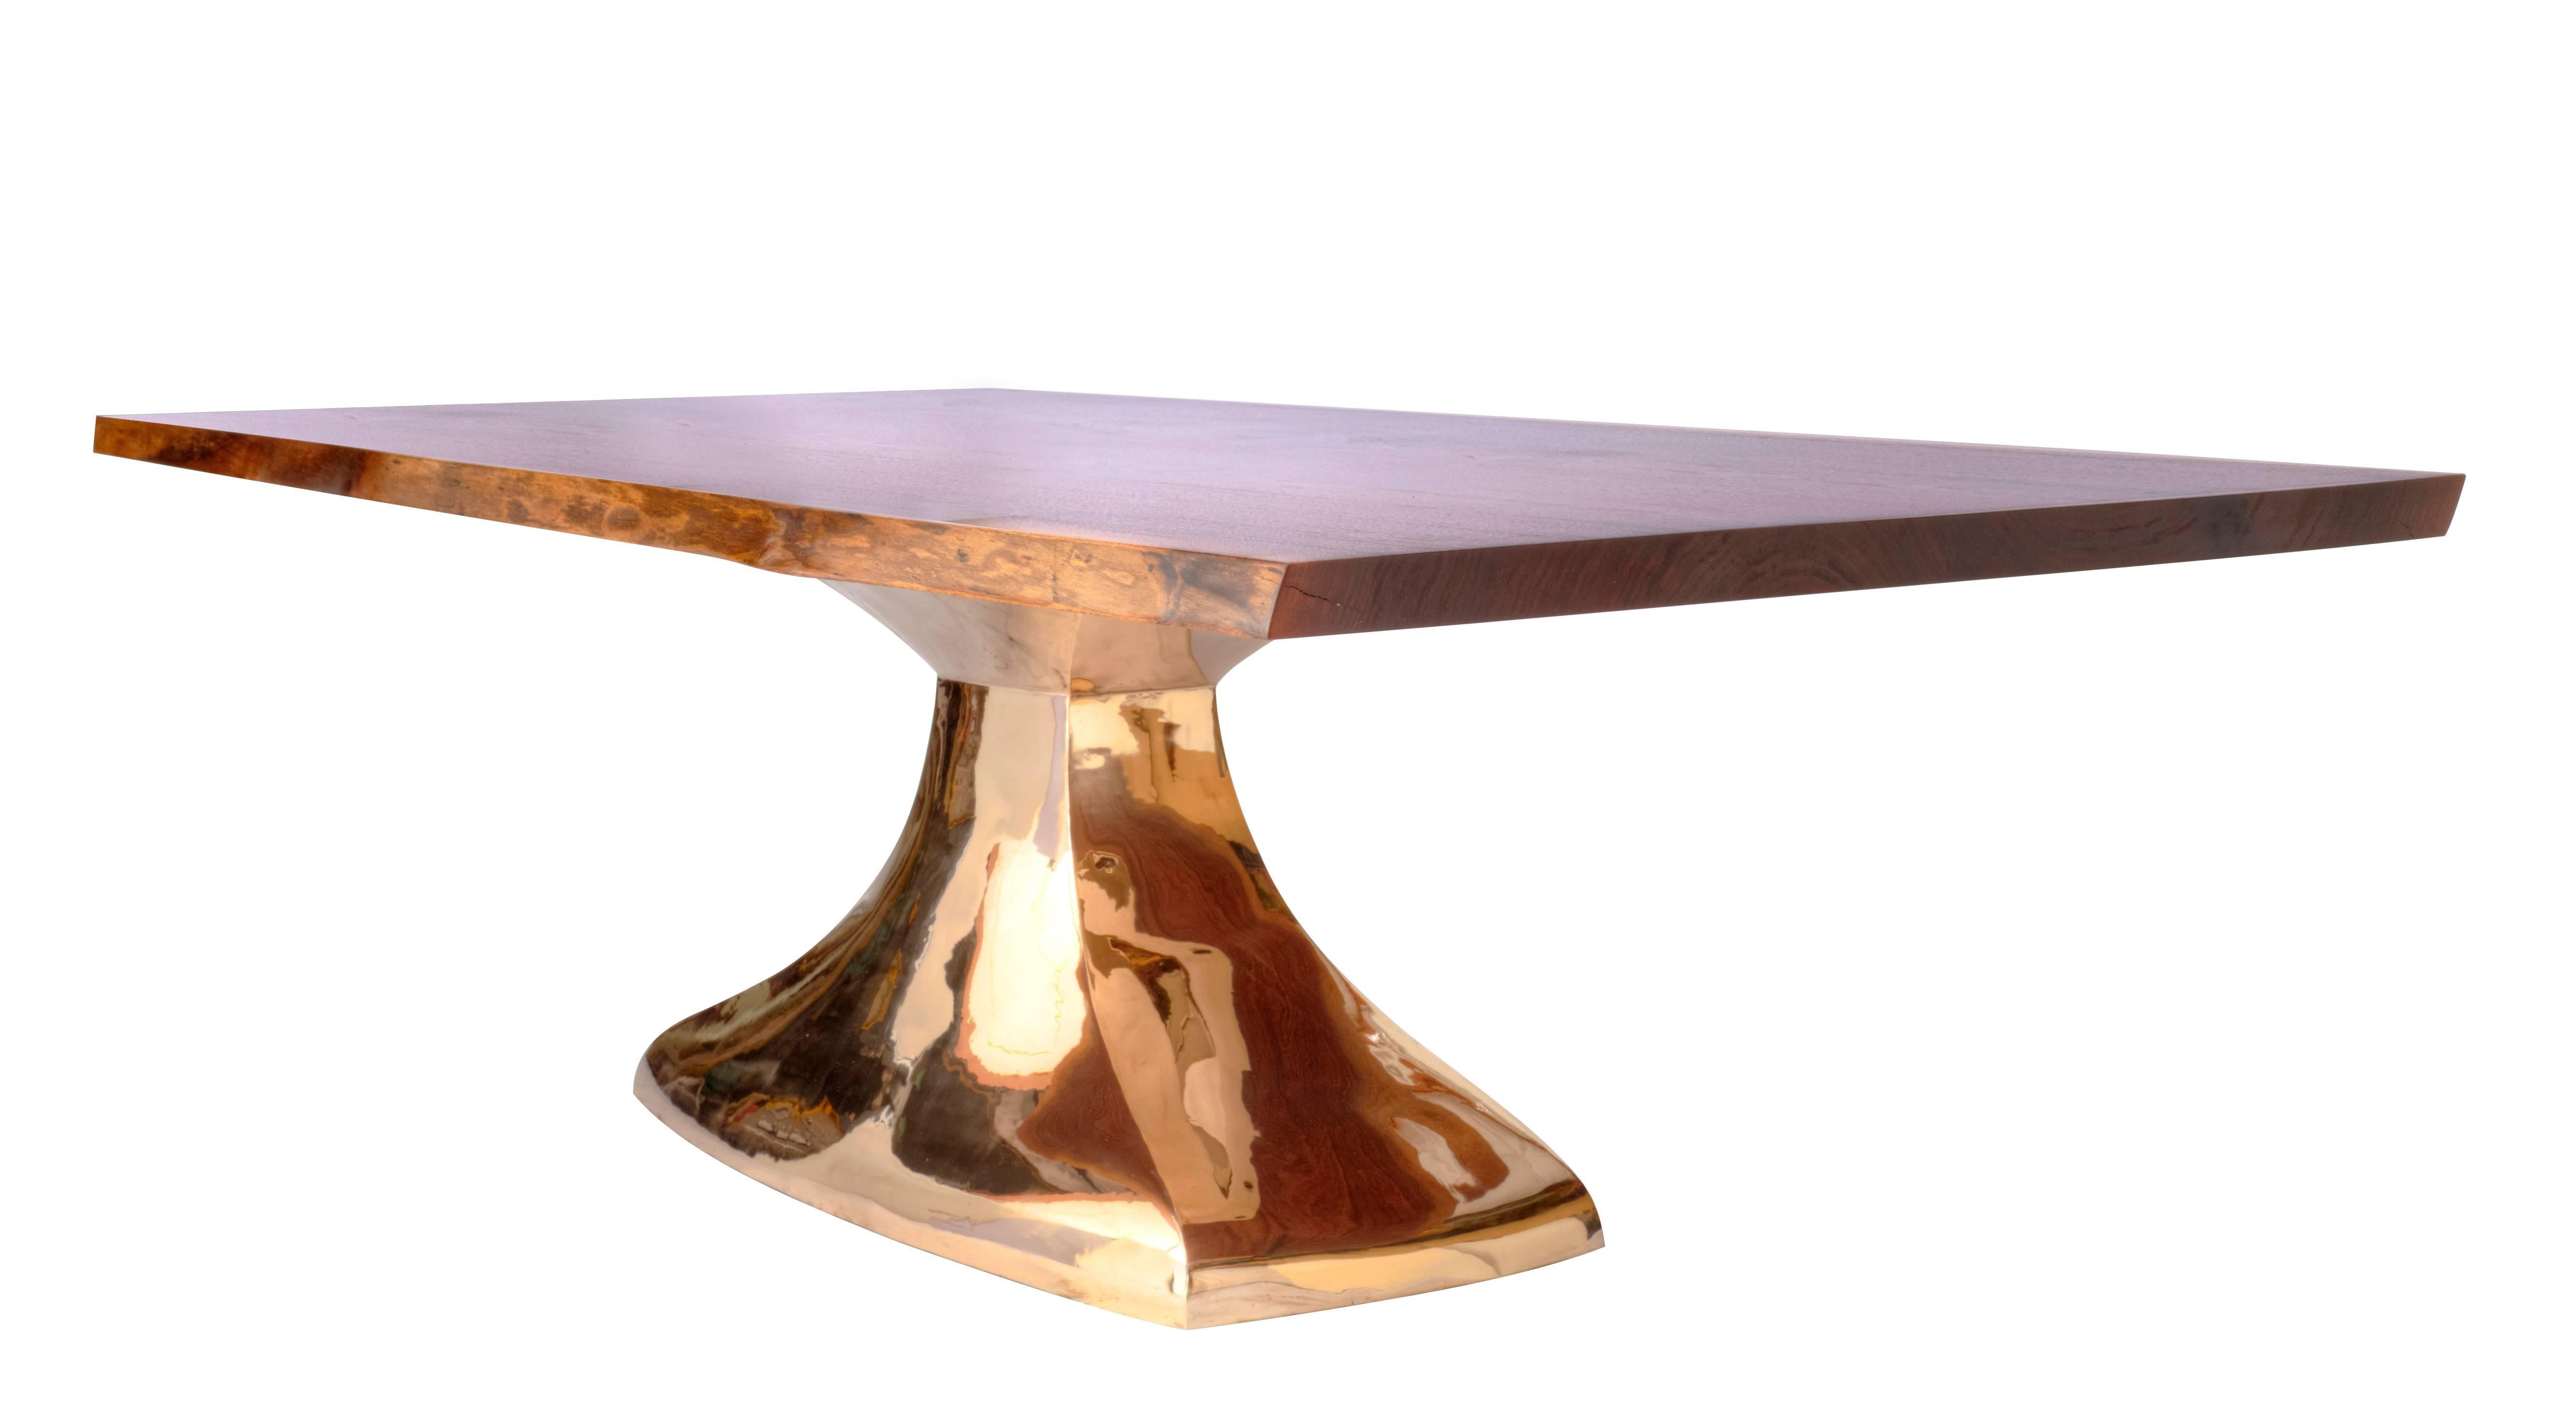 Modern Nine Foot Hand-Sculpted Bronze and Walnut Dining Table by Bret Cavanaugh